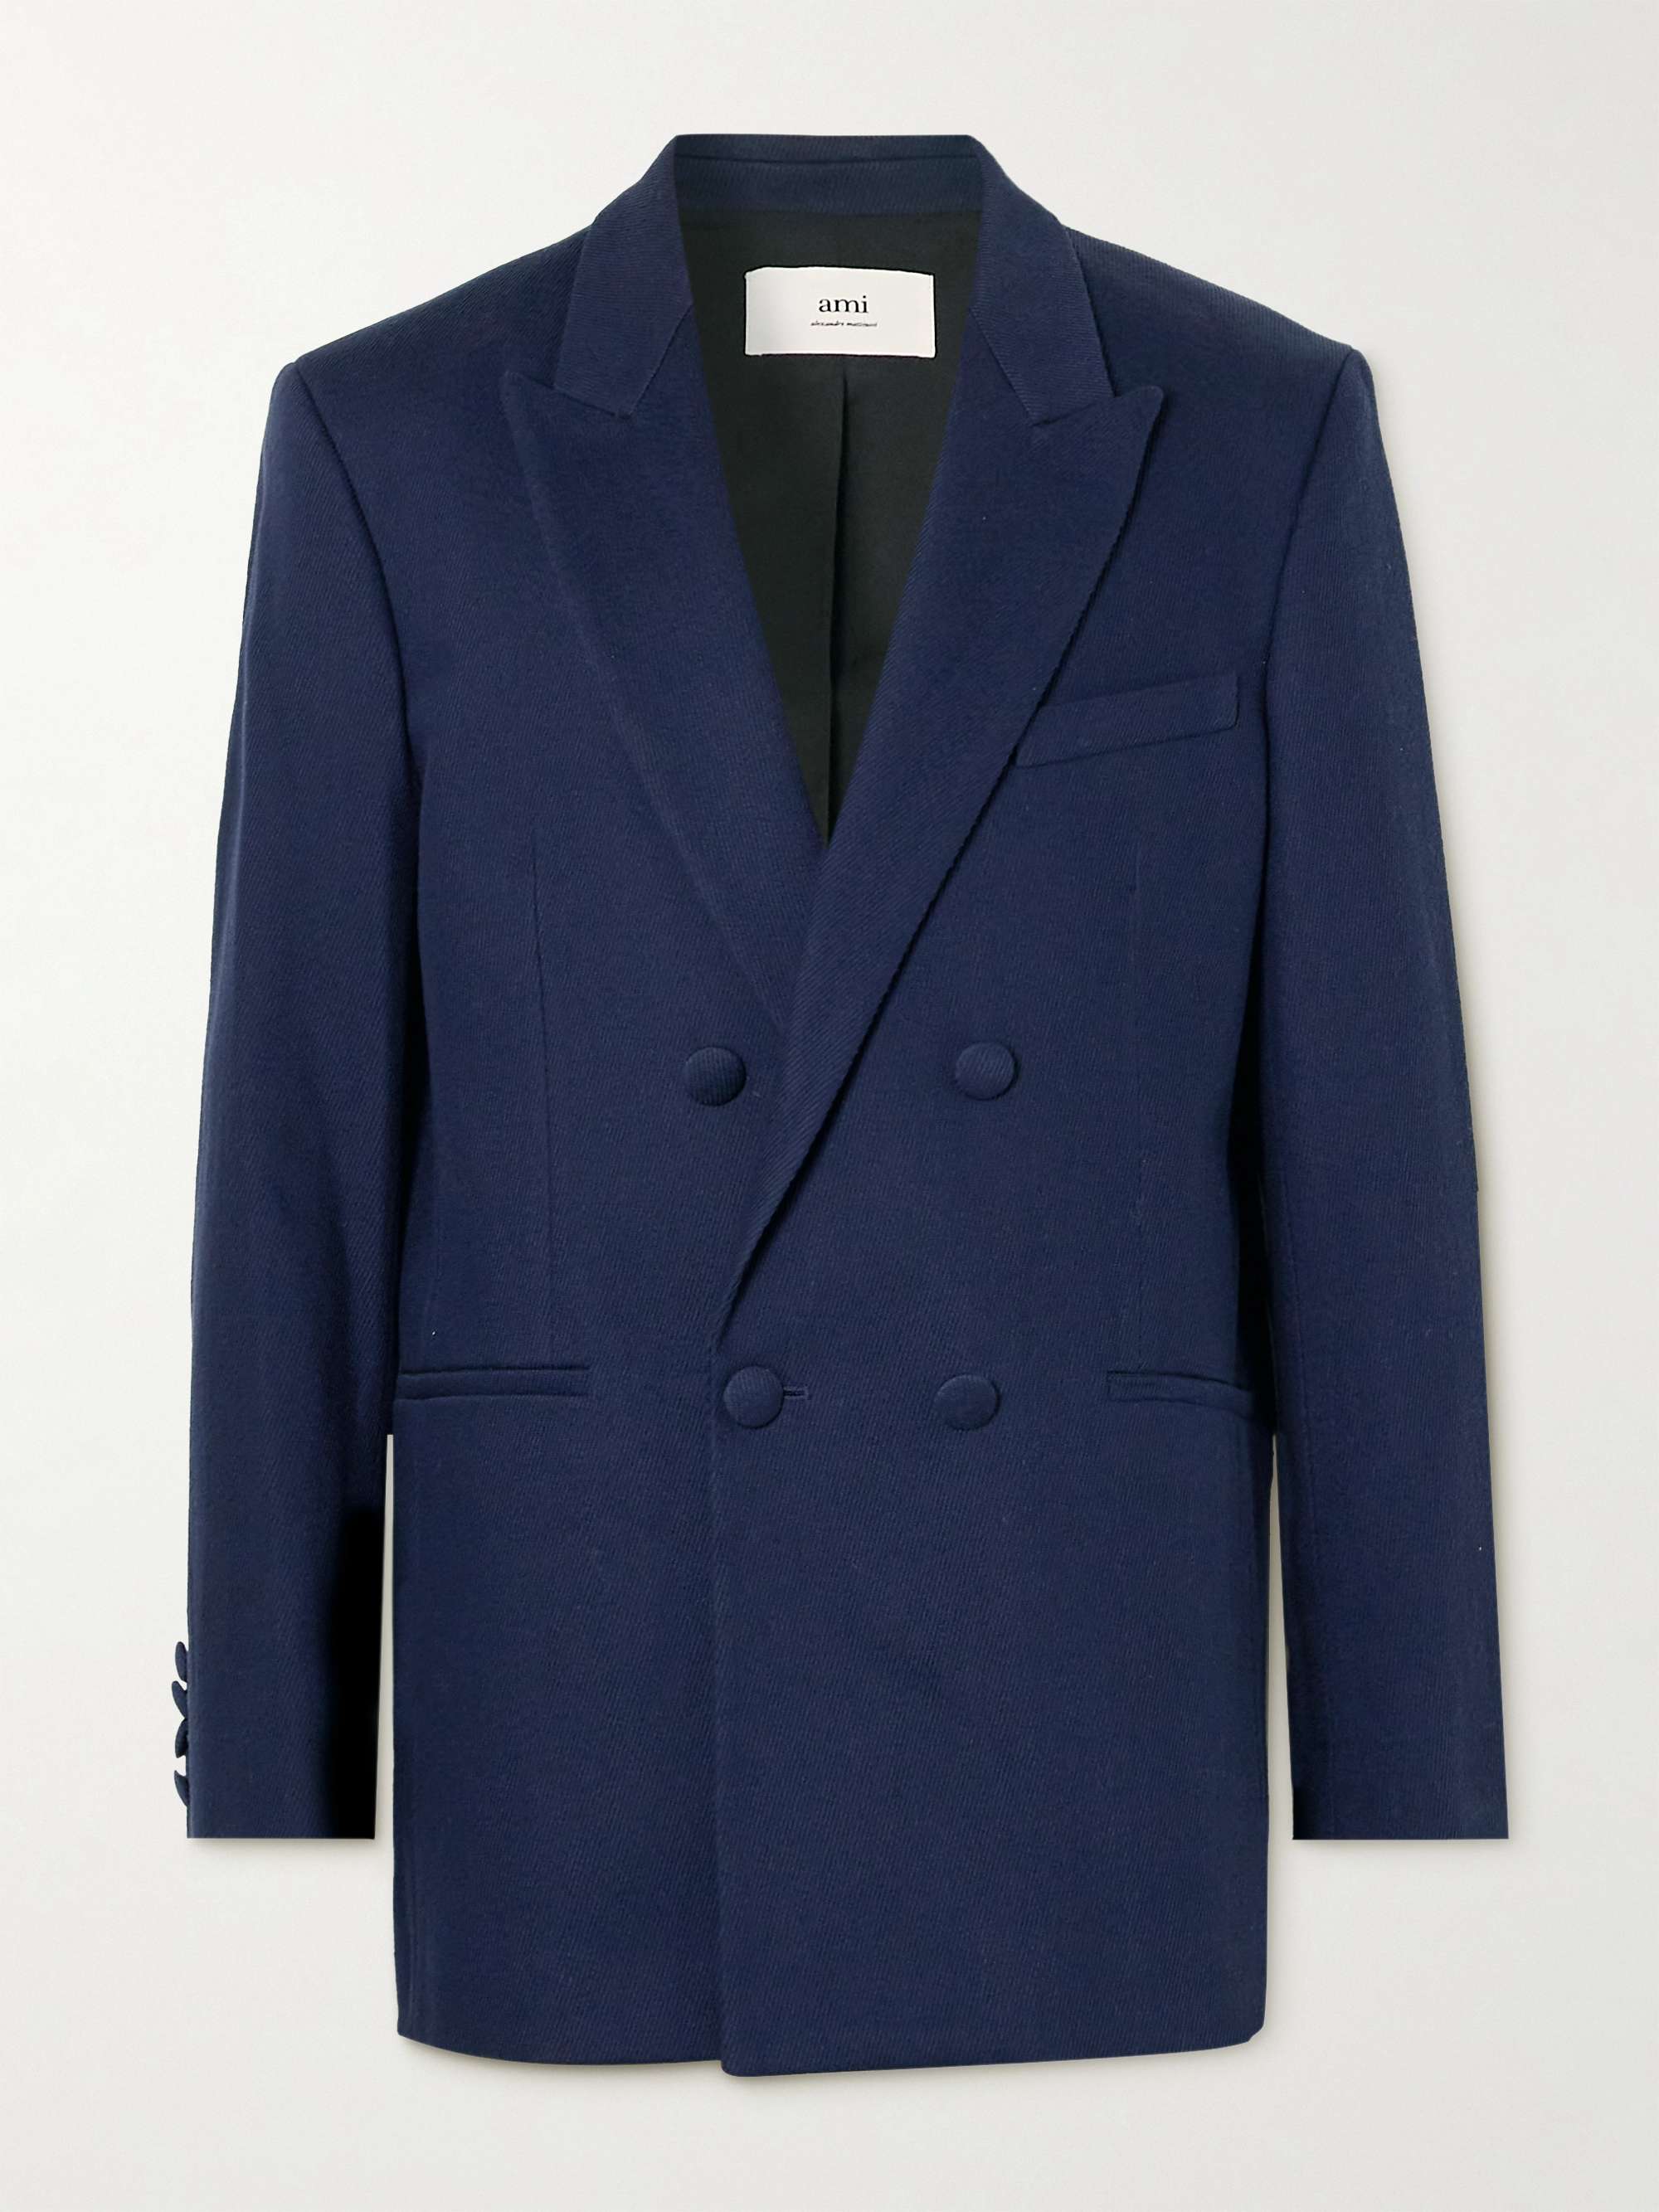 AMI PARIS Double-Breasted Cotton-Twill Suit Jacket